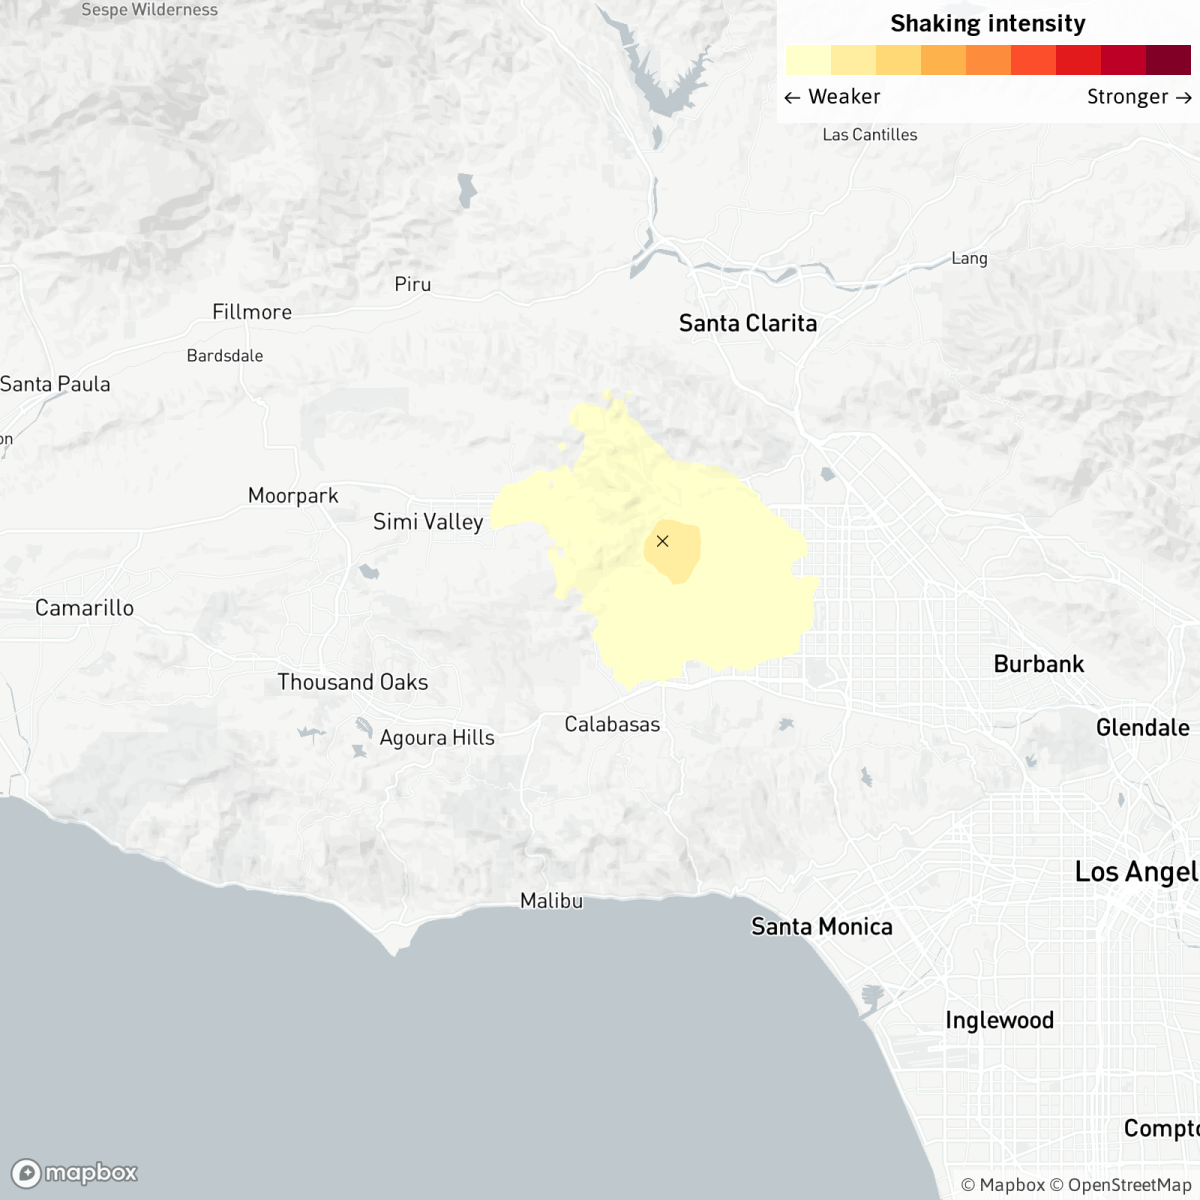 A magnitude-3.2 earthquake was reported at 2:45 p.m. Sunday in Los Angeles, according to the USGS.